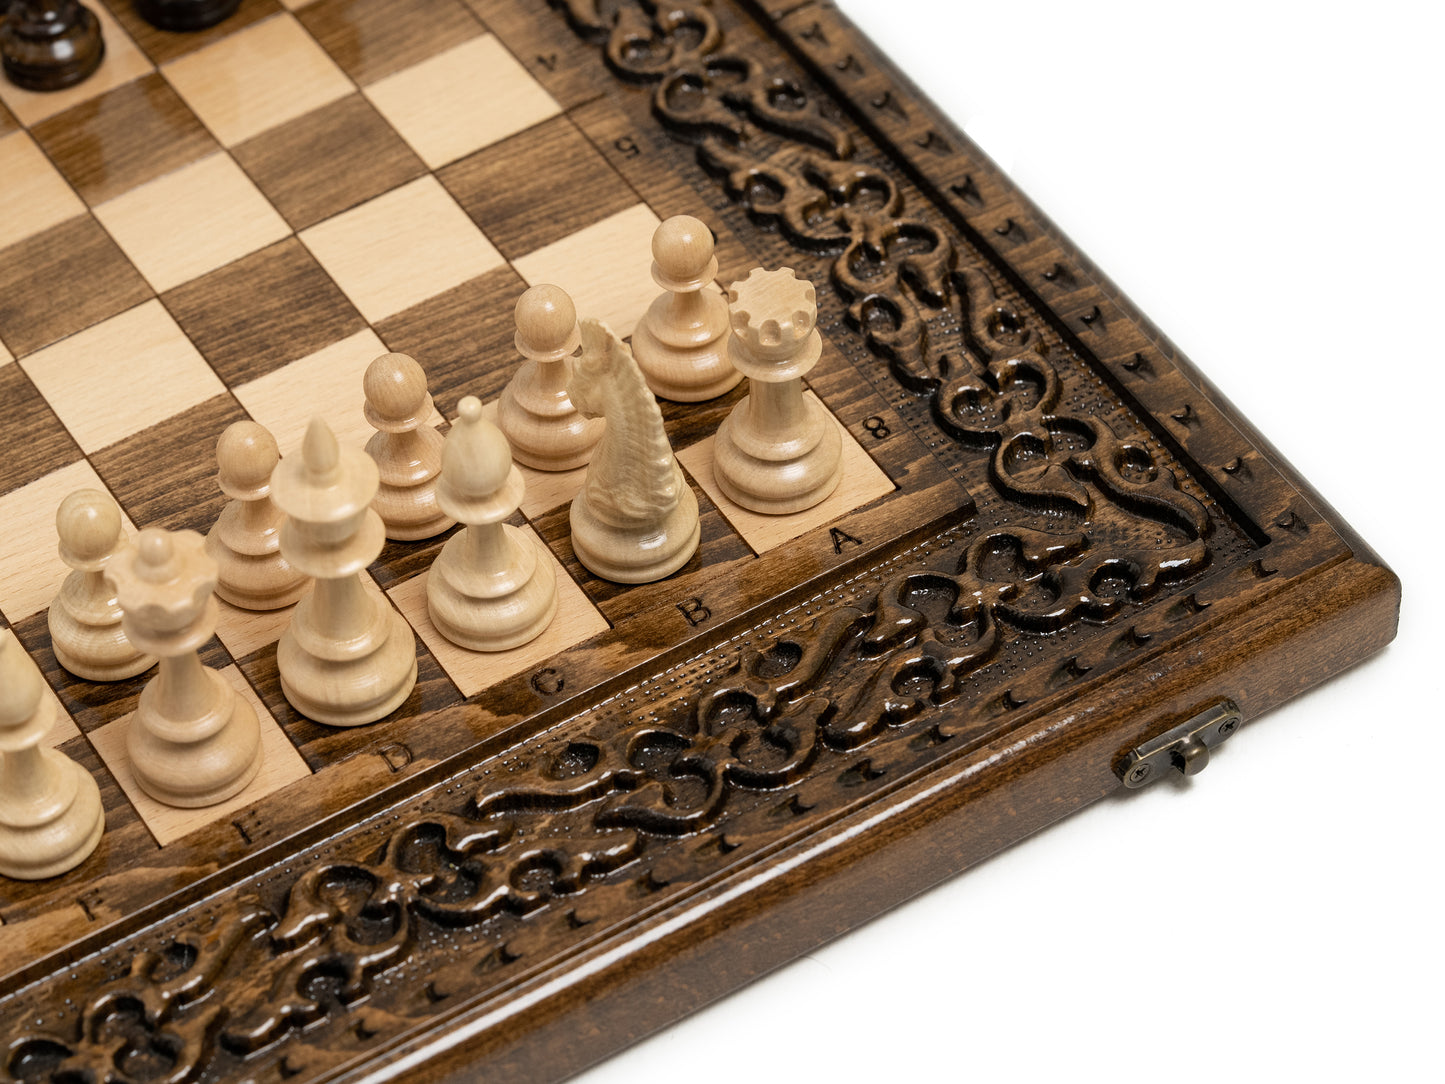 Close-up view of hand-carved wooden chess pieces